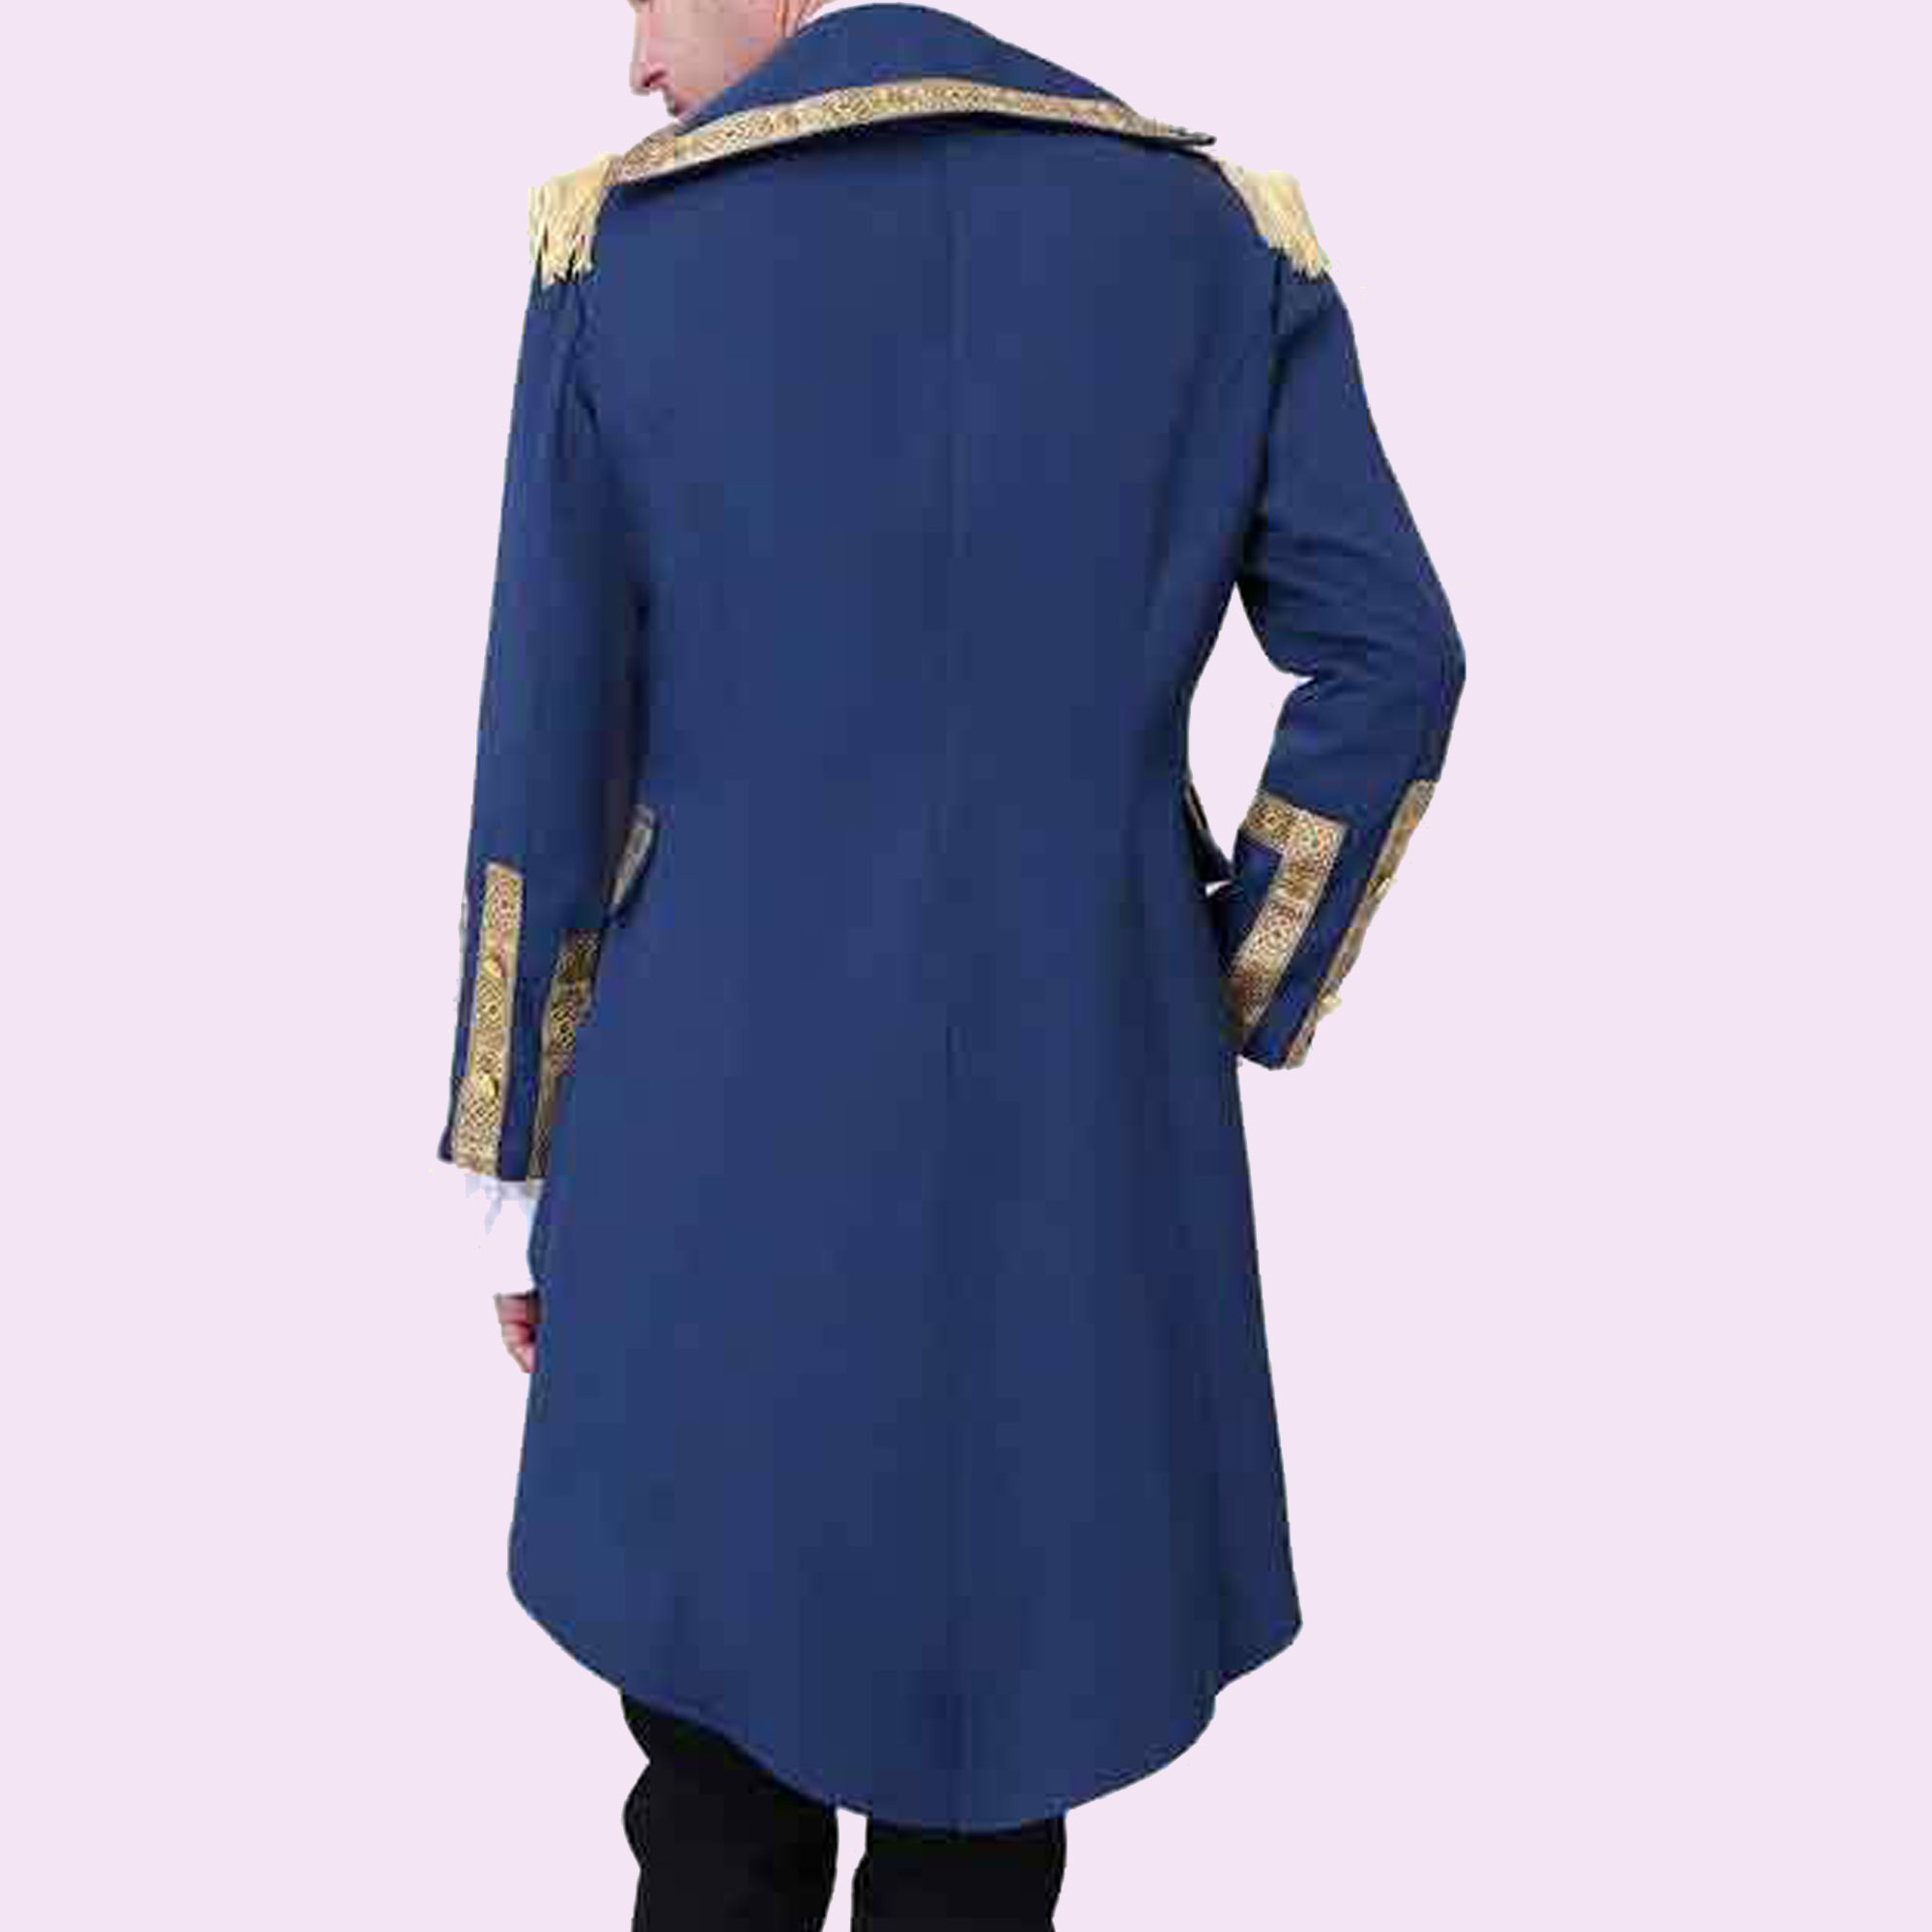 Buy New Men Blue Colonial Hamilton Military Musical Cosplay Gothic ...